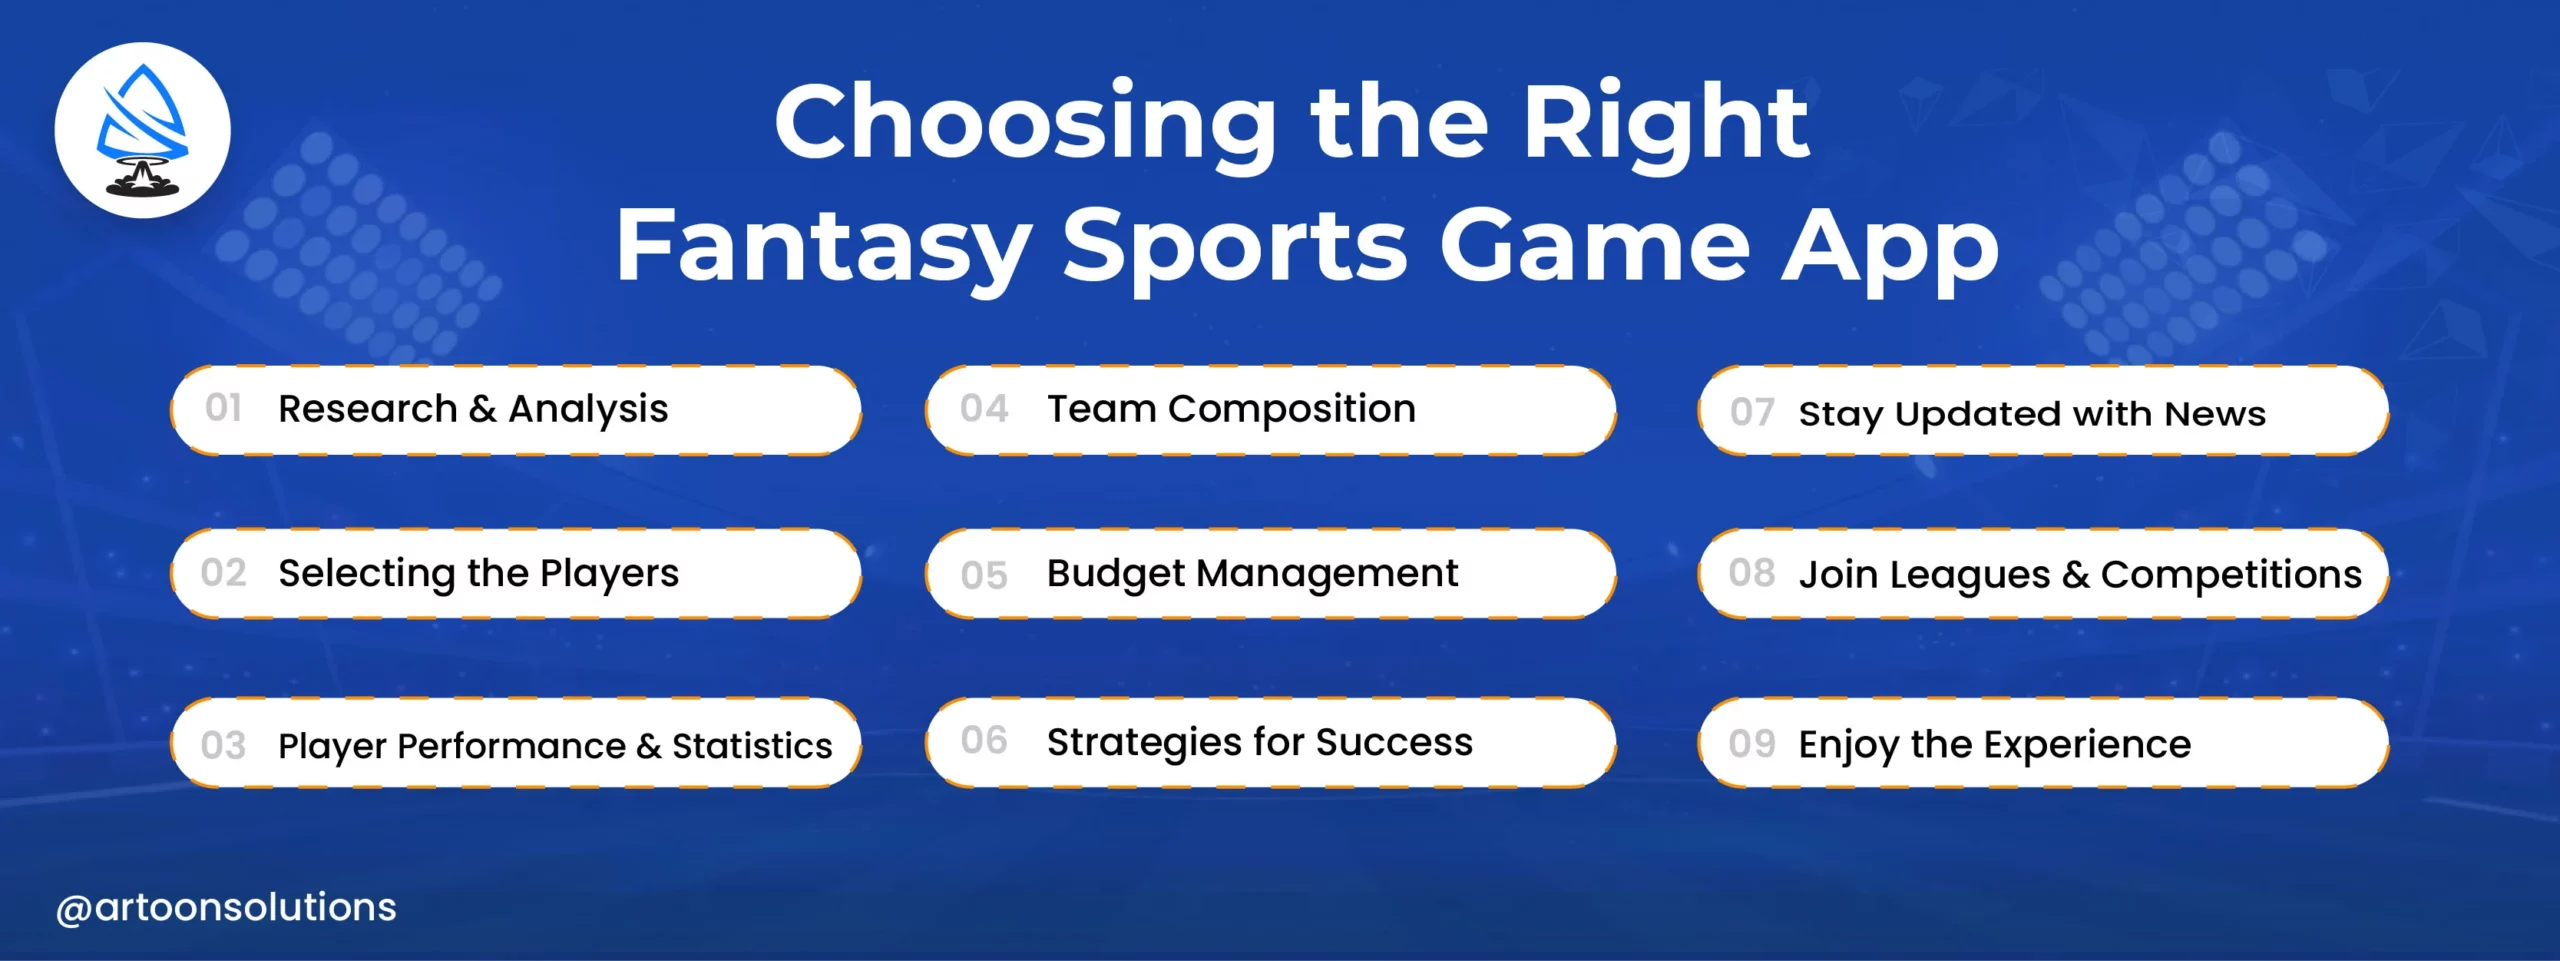 Choosing the Right Fantasy Sports Game App